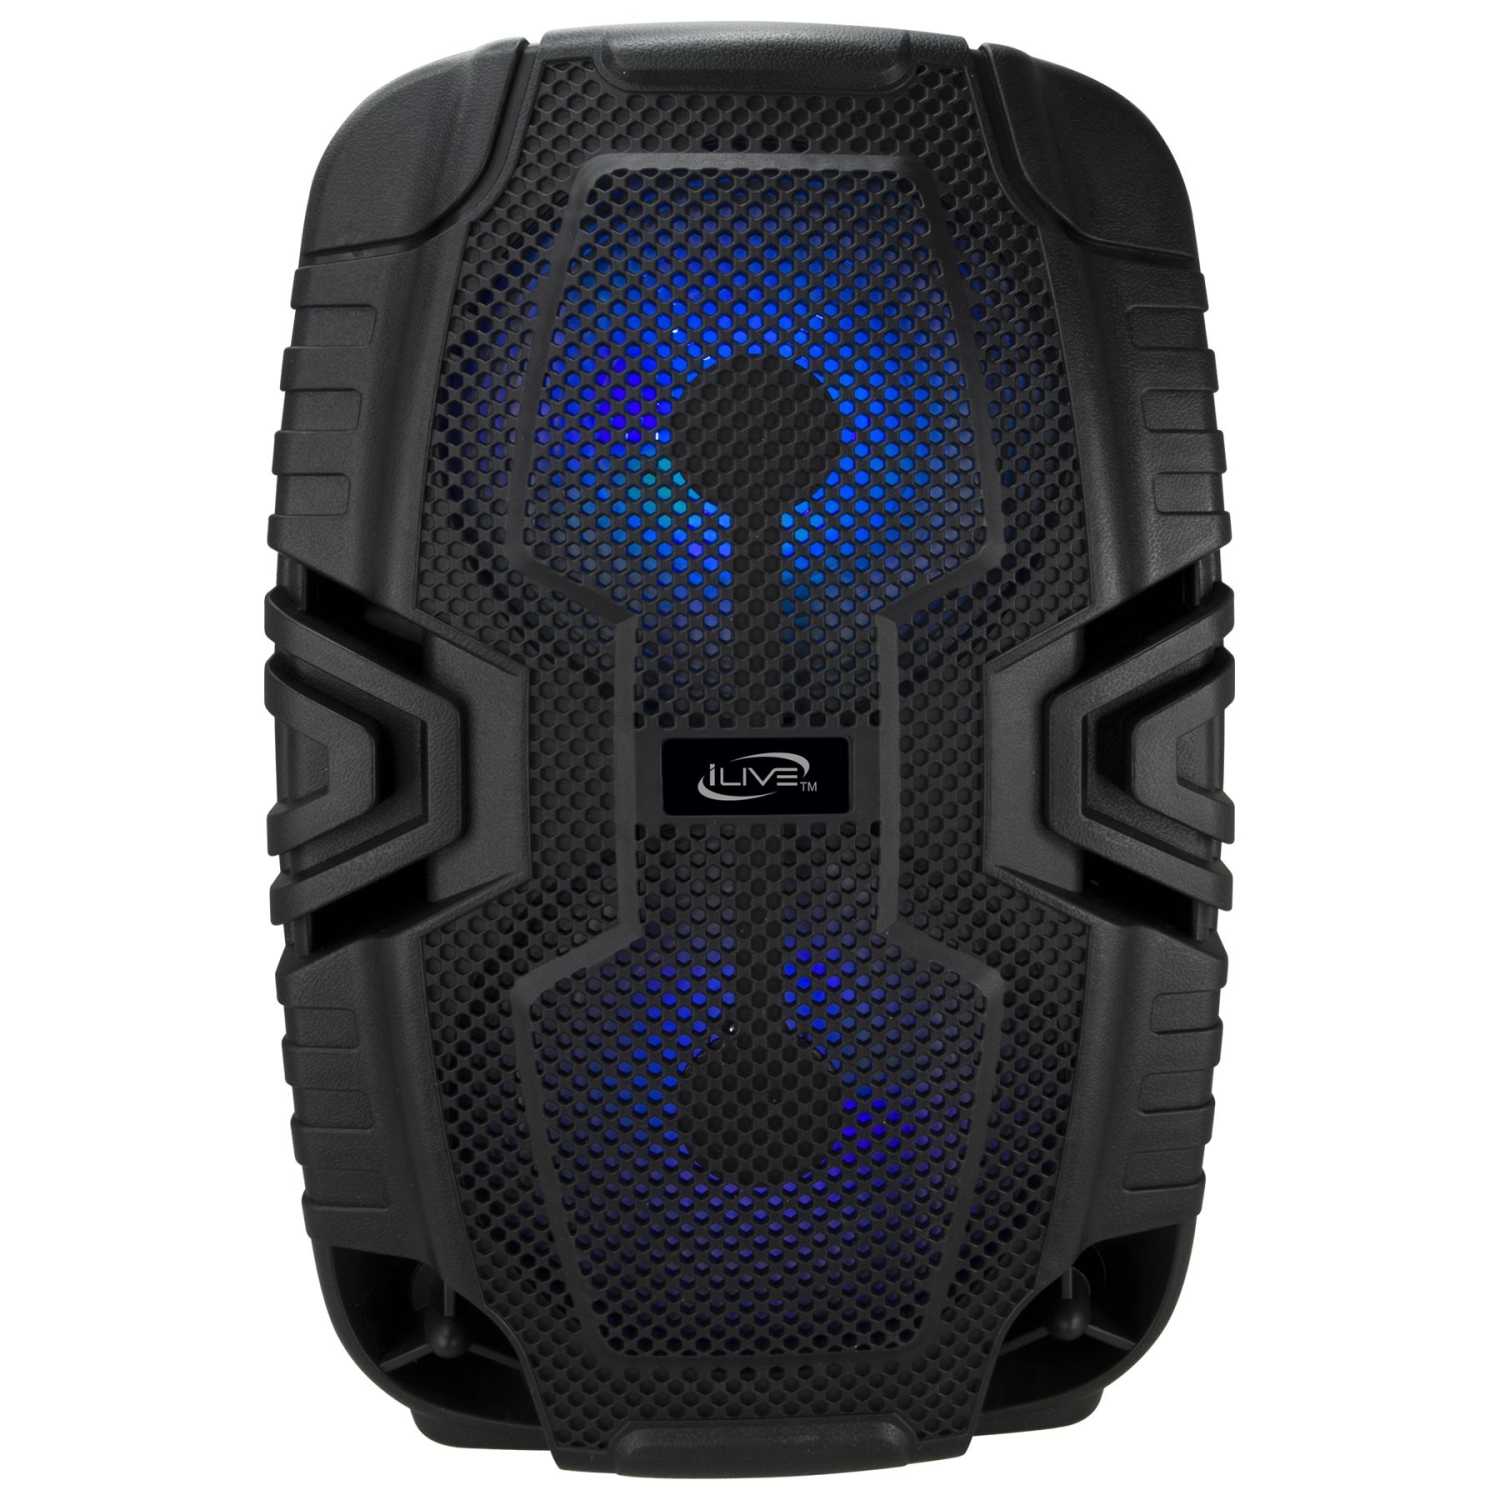 iLive ISB250B Bluetooth Wireless Party/Tailgate Speaker with LEDs